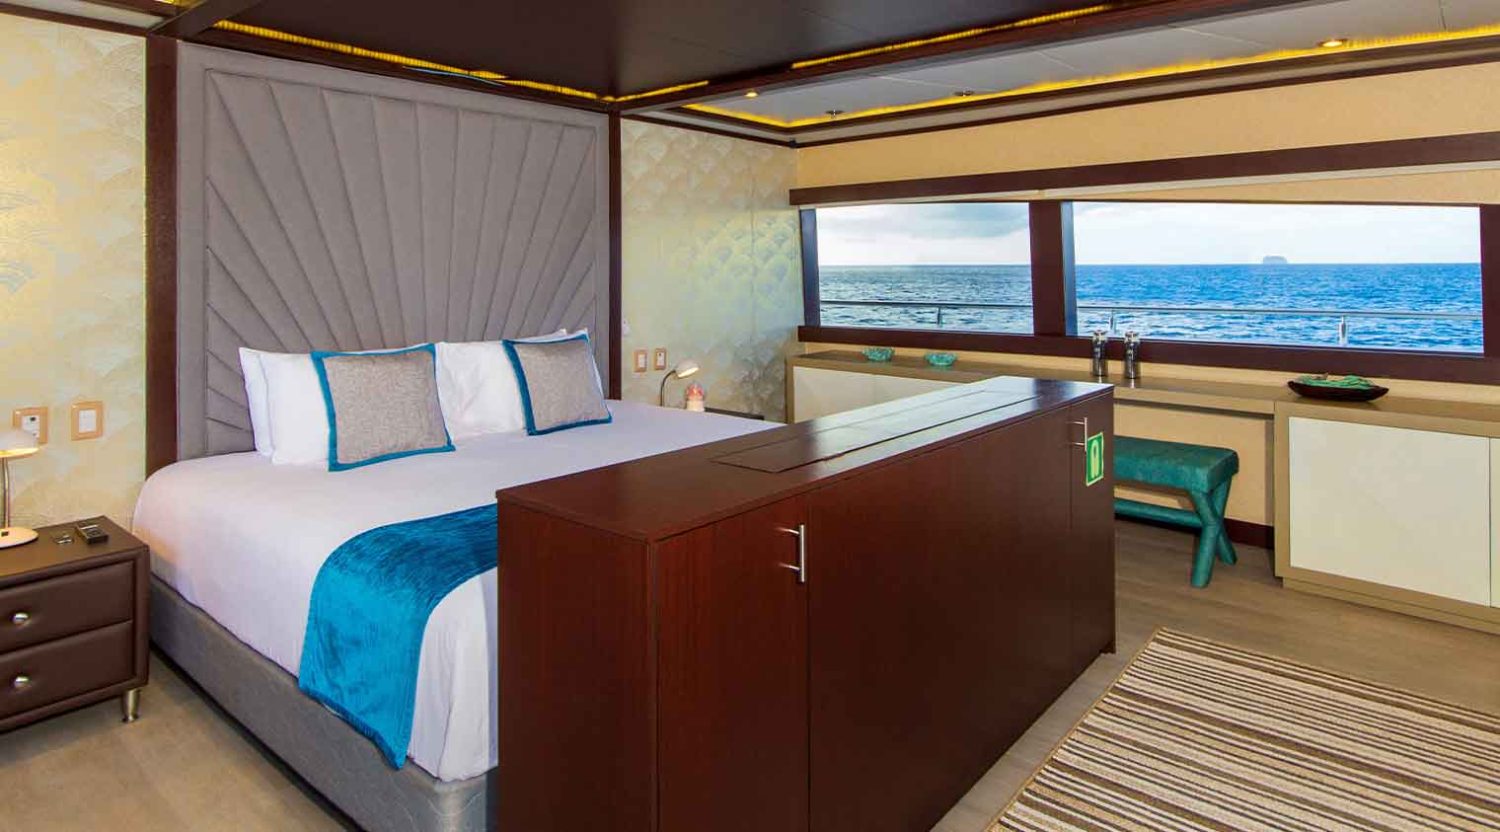 Grand Majestic Galapagos Yacht queen-size bed bedroom of galapagos islands tours